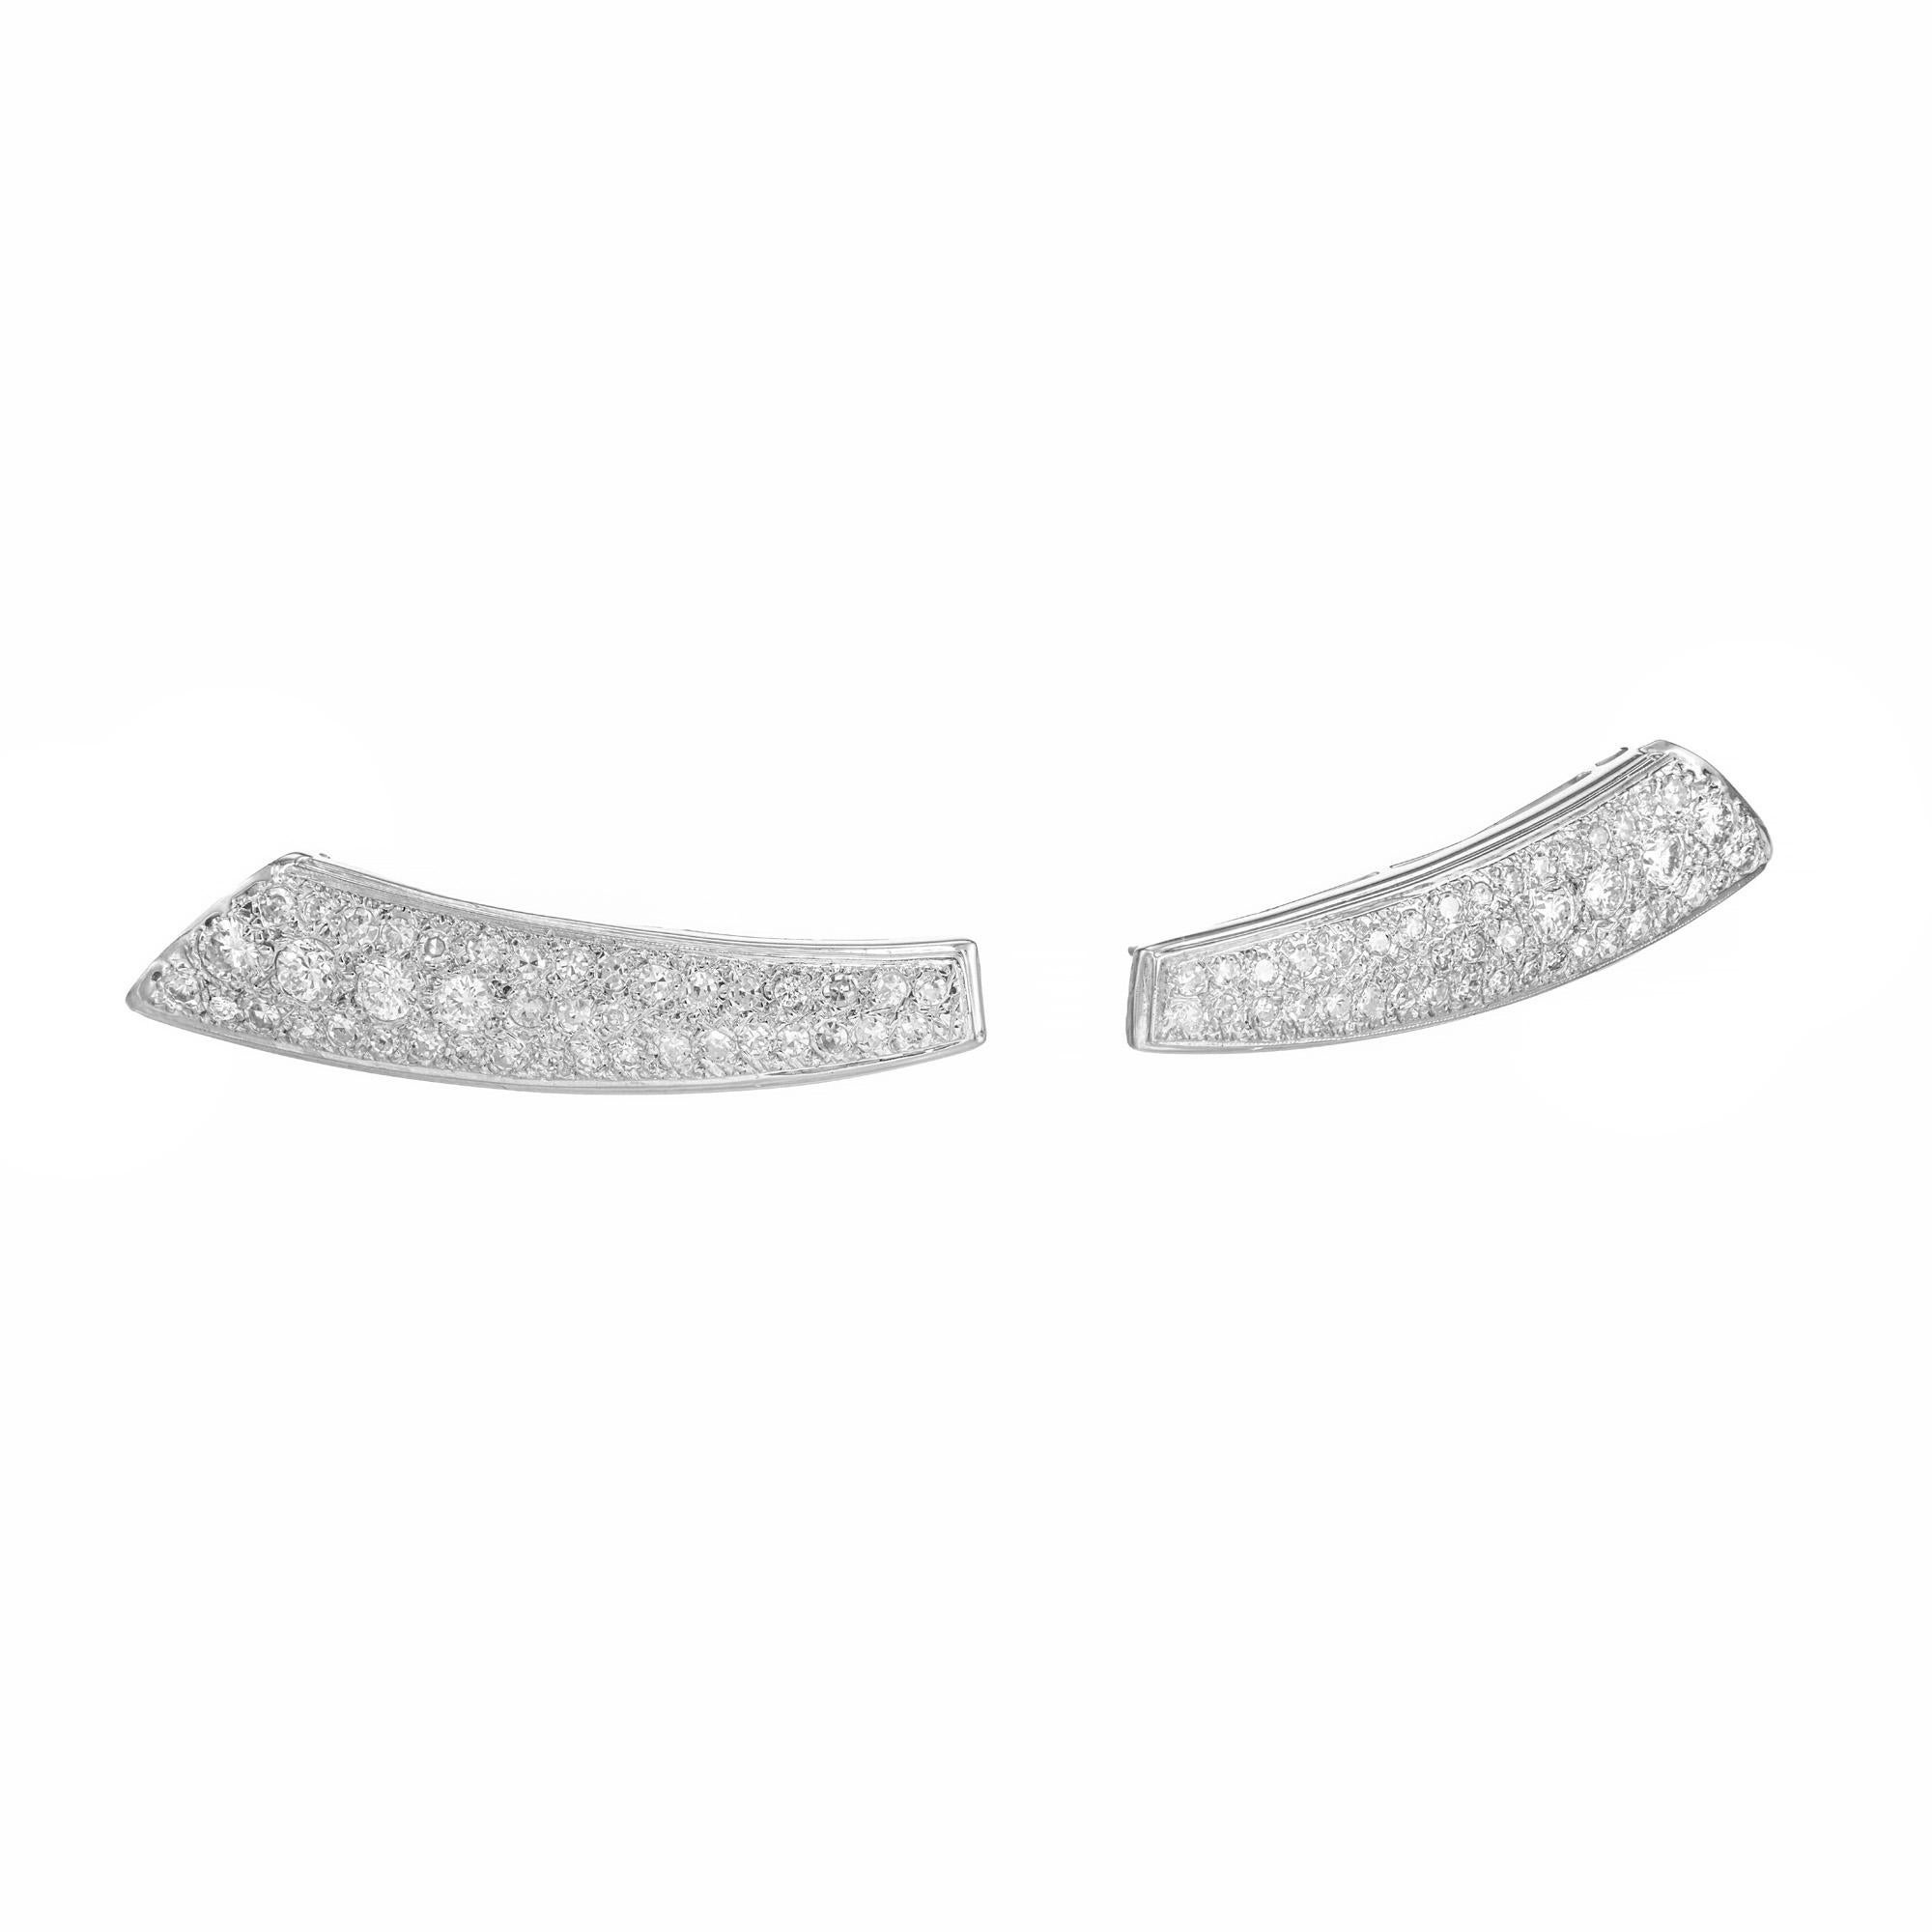 Crescent shaped diamond earrings. 2.04 carat micro pave round diamonds set in 14k white gold settings. Circa 1960's

8 round brilliant cut diamonds G-H SI, approx. .80ct
76 single cut diamonds G-H SI, approx. 1.00cts
14k white gold 
8.1 grams
Top to